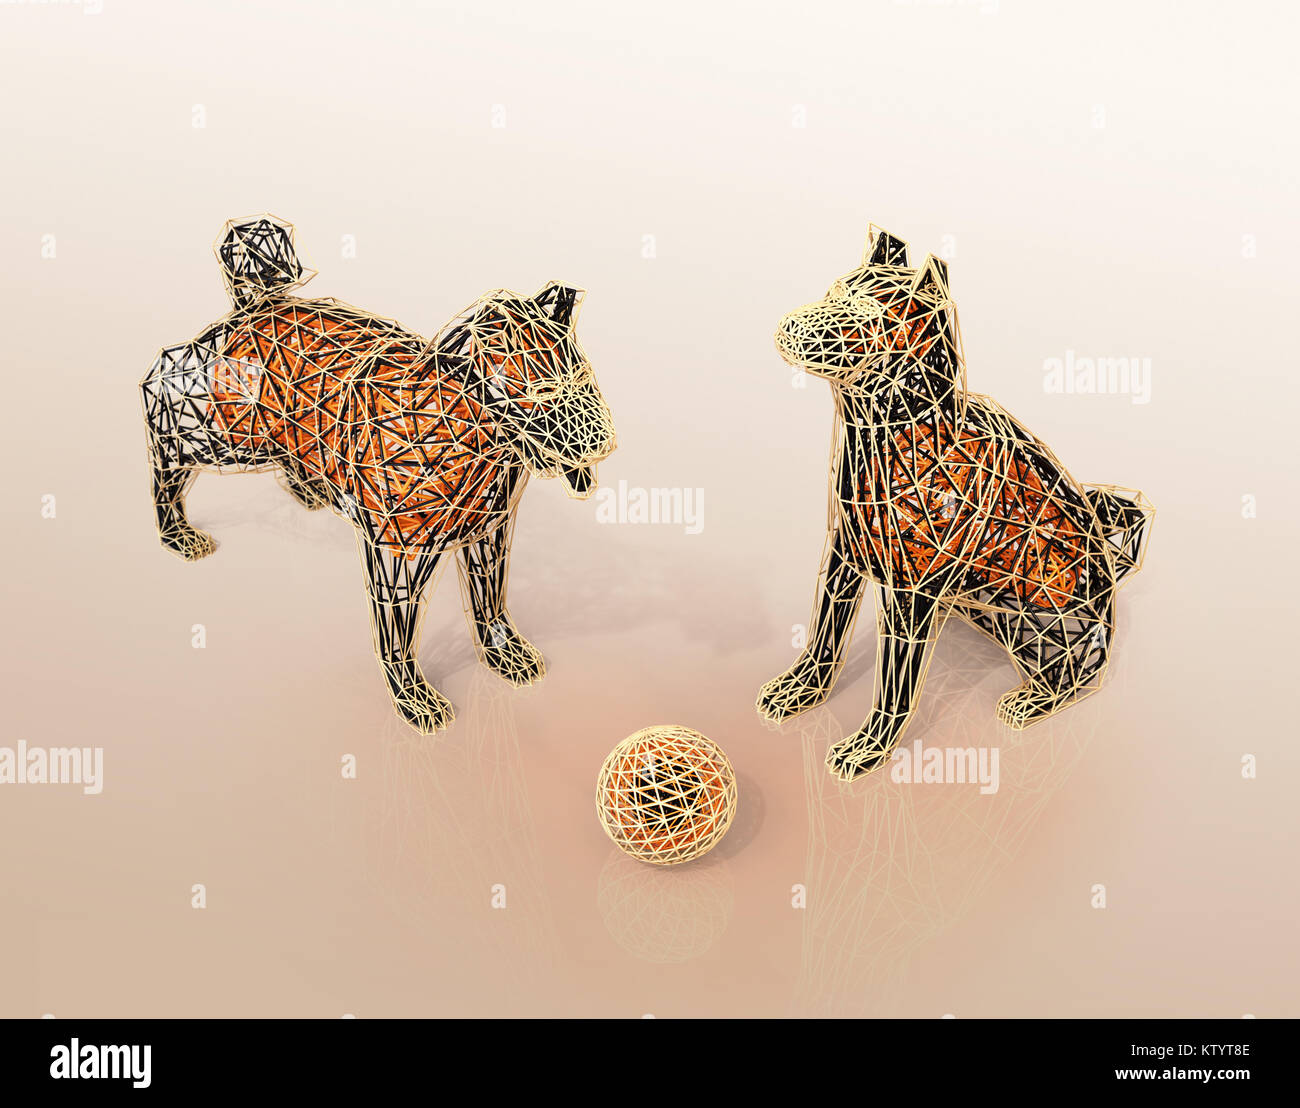 Wire frame of dogs and ball  in low polygon style. 3D rendering image. Stock Photo